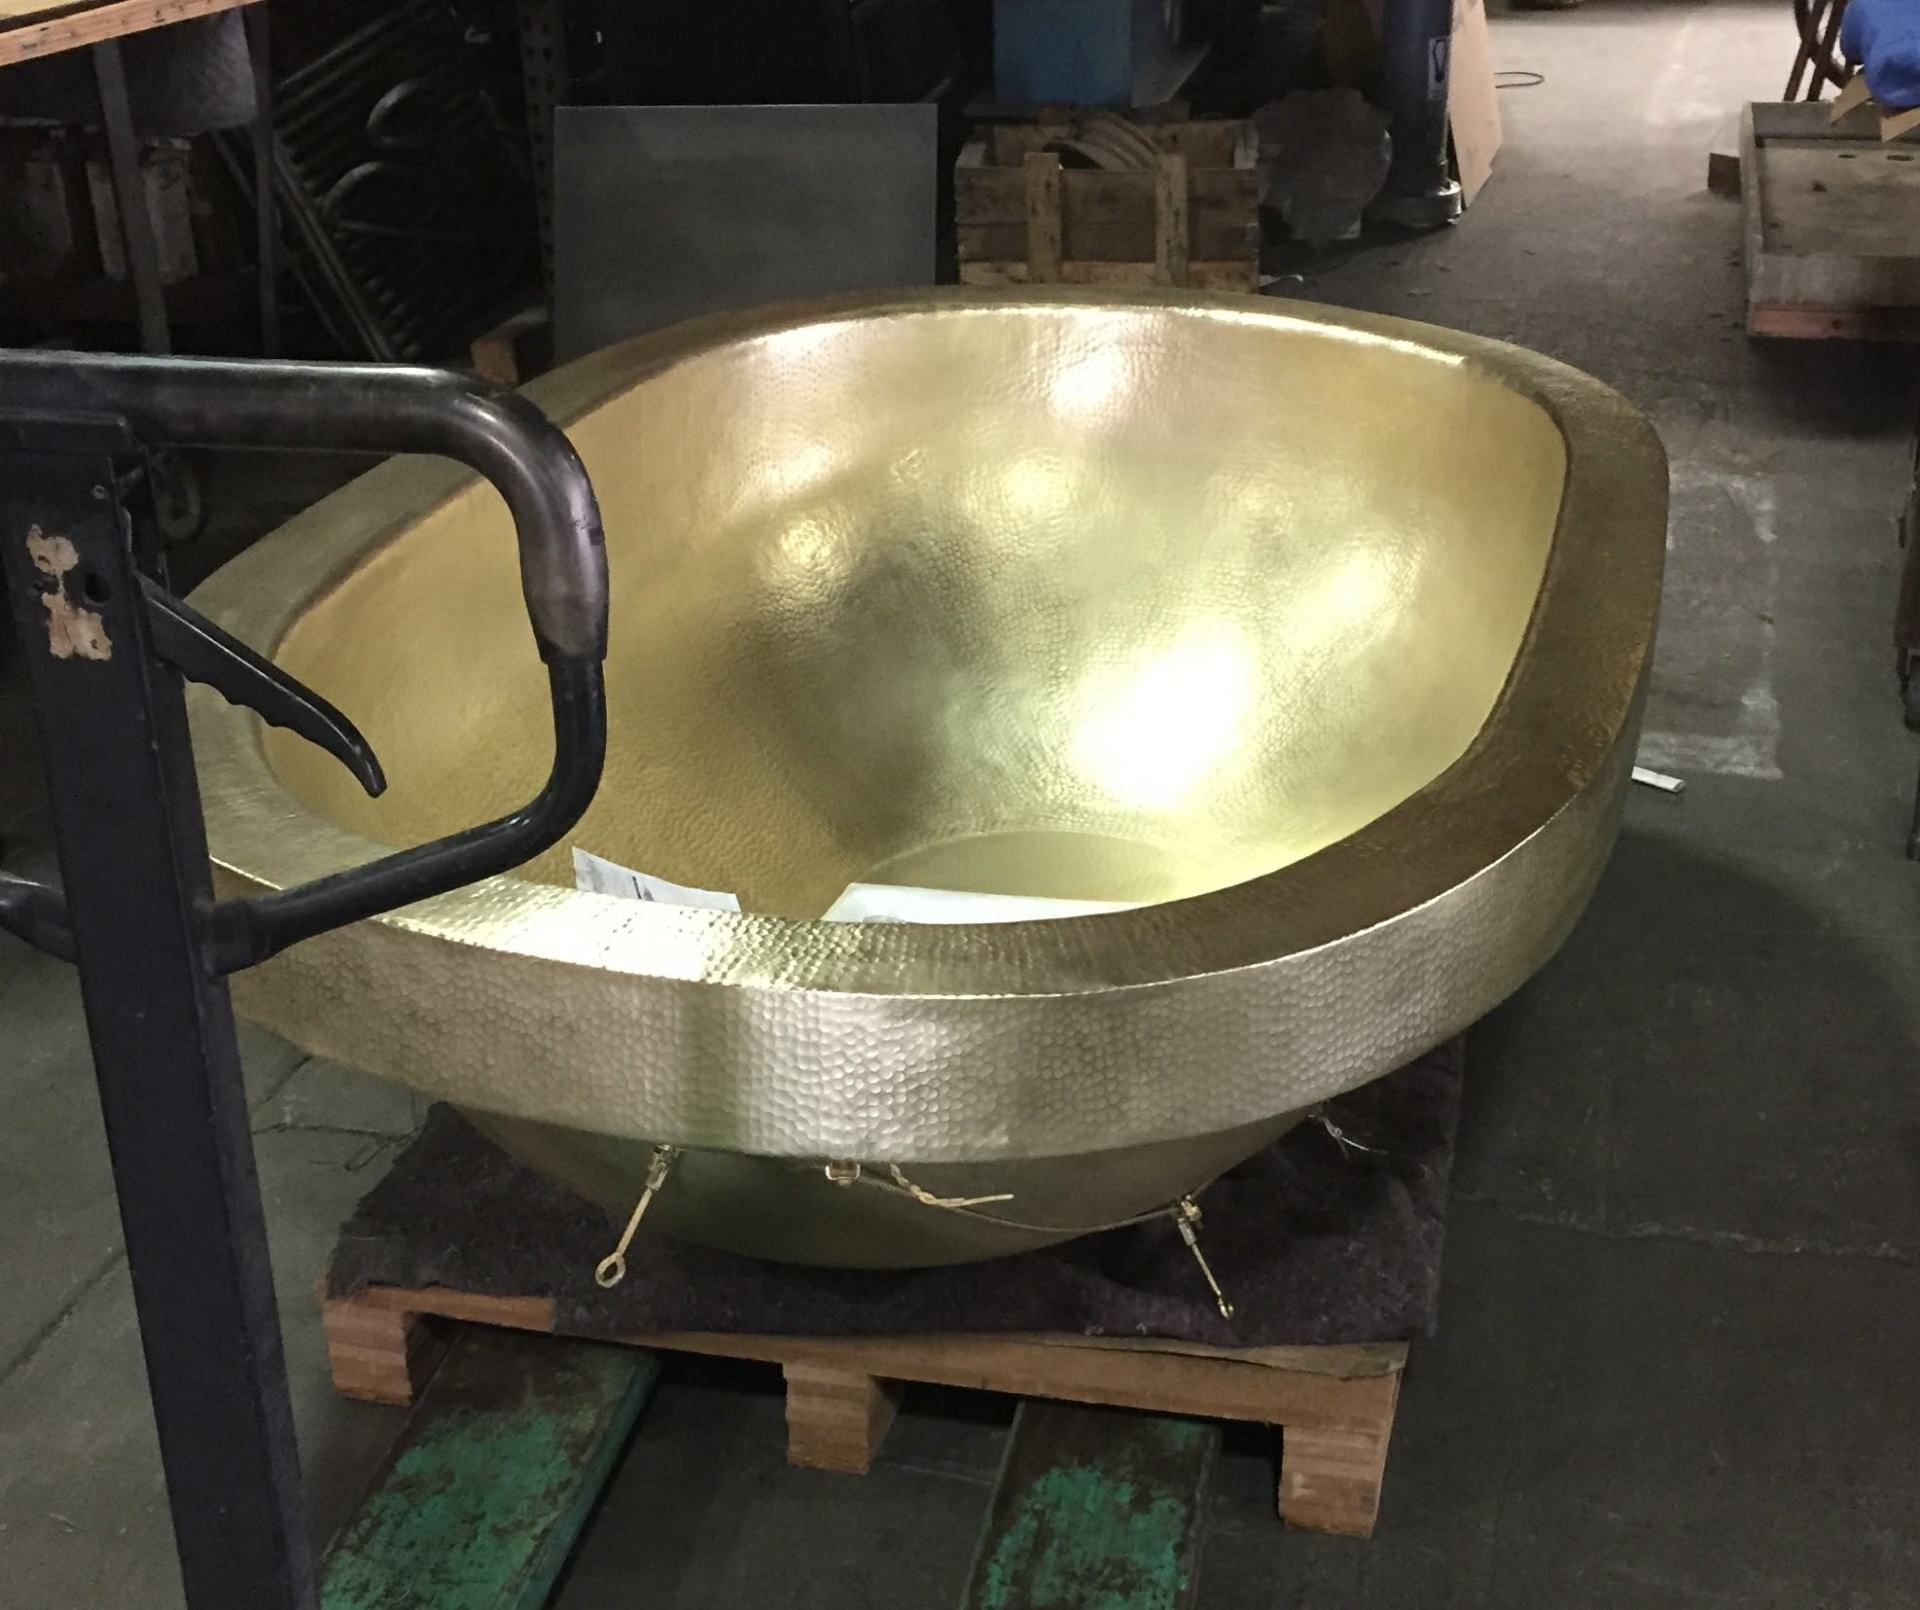 Gold Plated Tub - Metal Plating Company in Los Angeles, CA